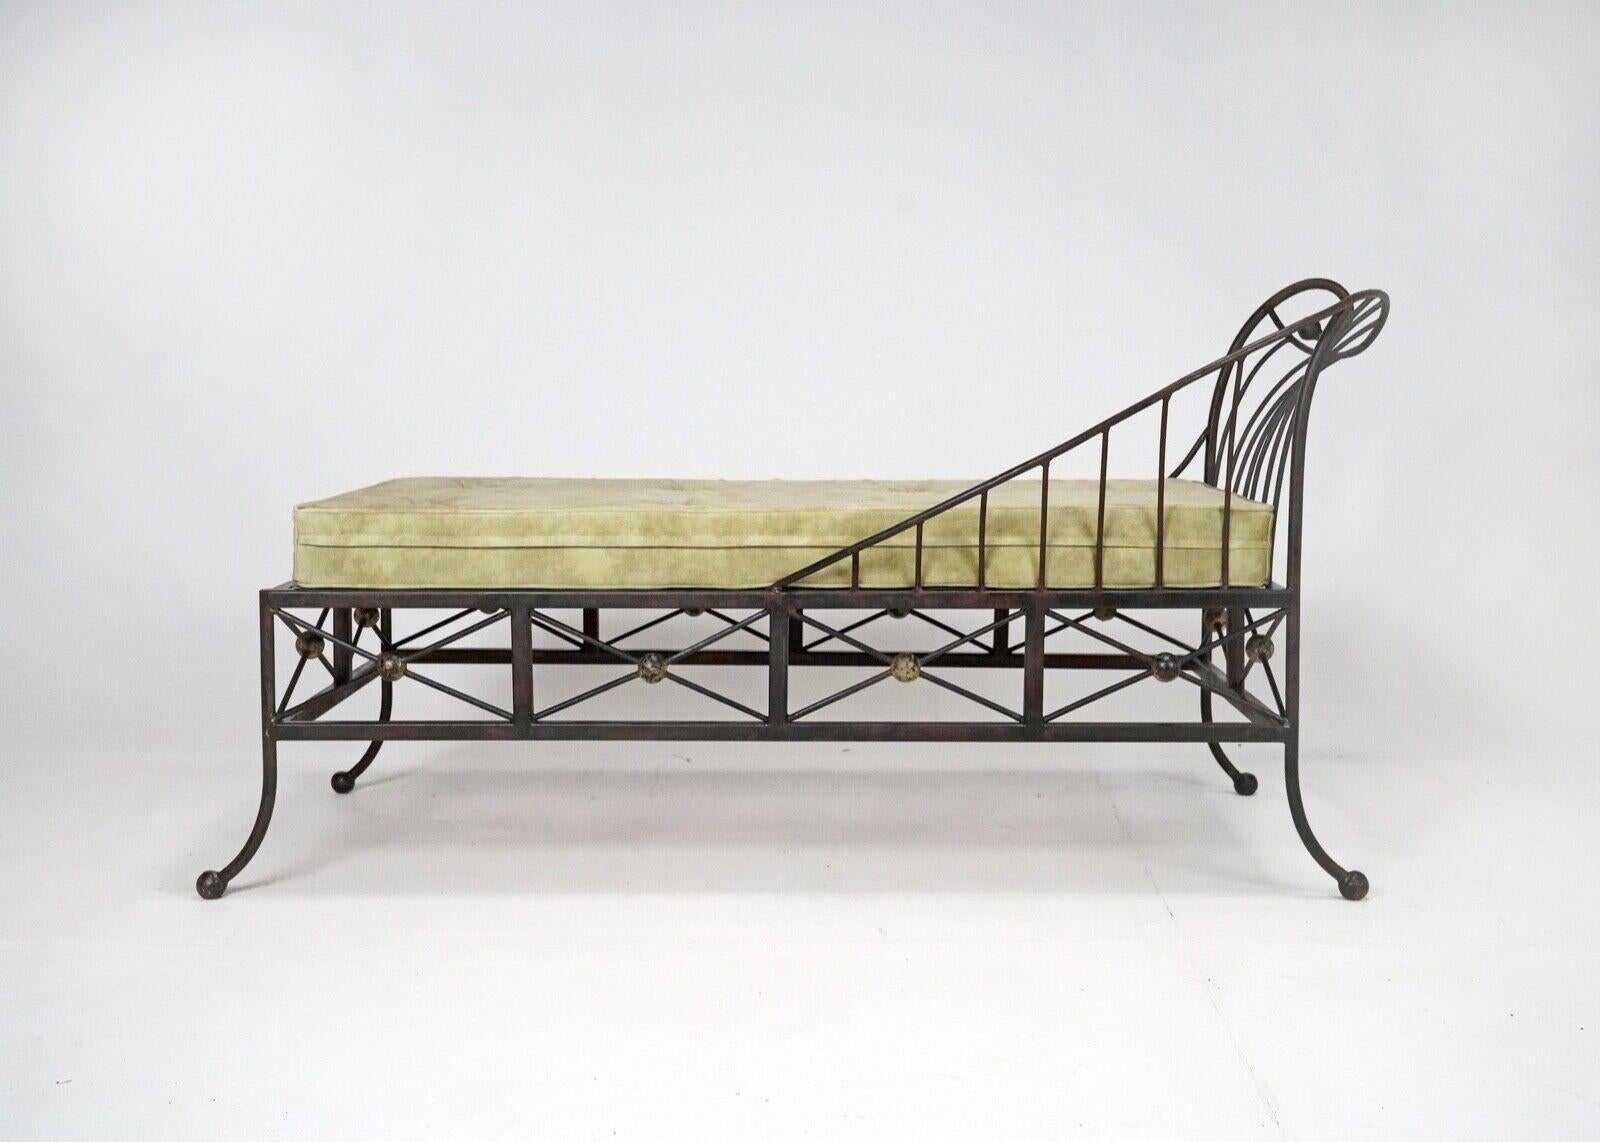 Français Vintage French Box Steel Metal Day Bed, Sun Lounger, Chaise Lounge Green Seat